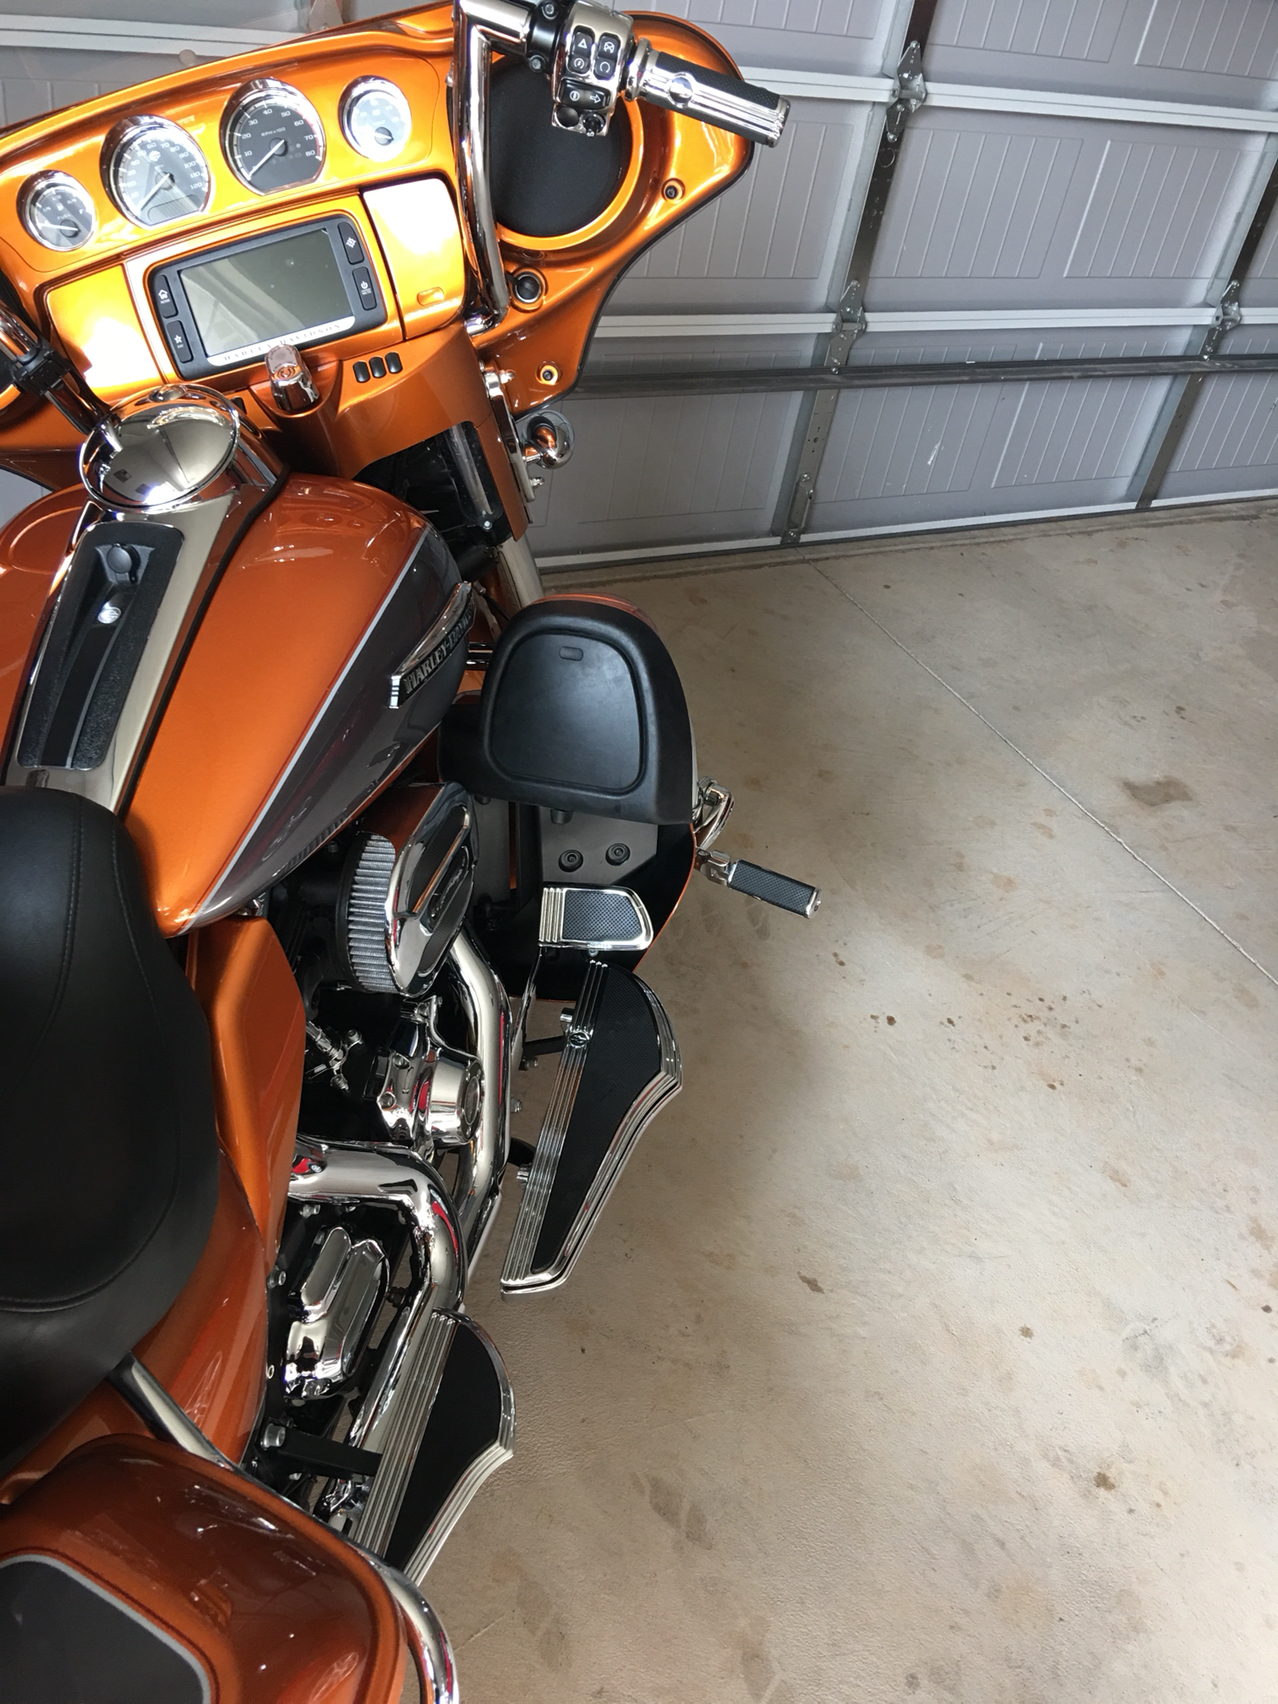 New Defiance Accessories Page 4 Harley Davidson Forums